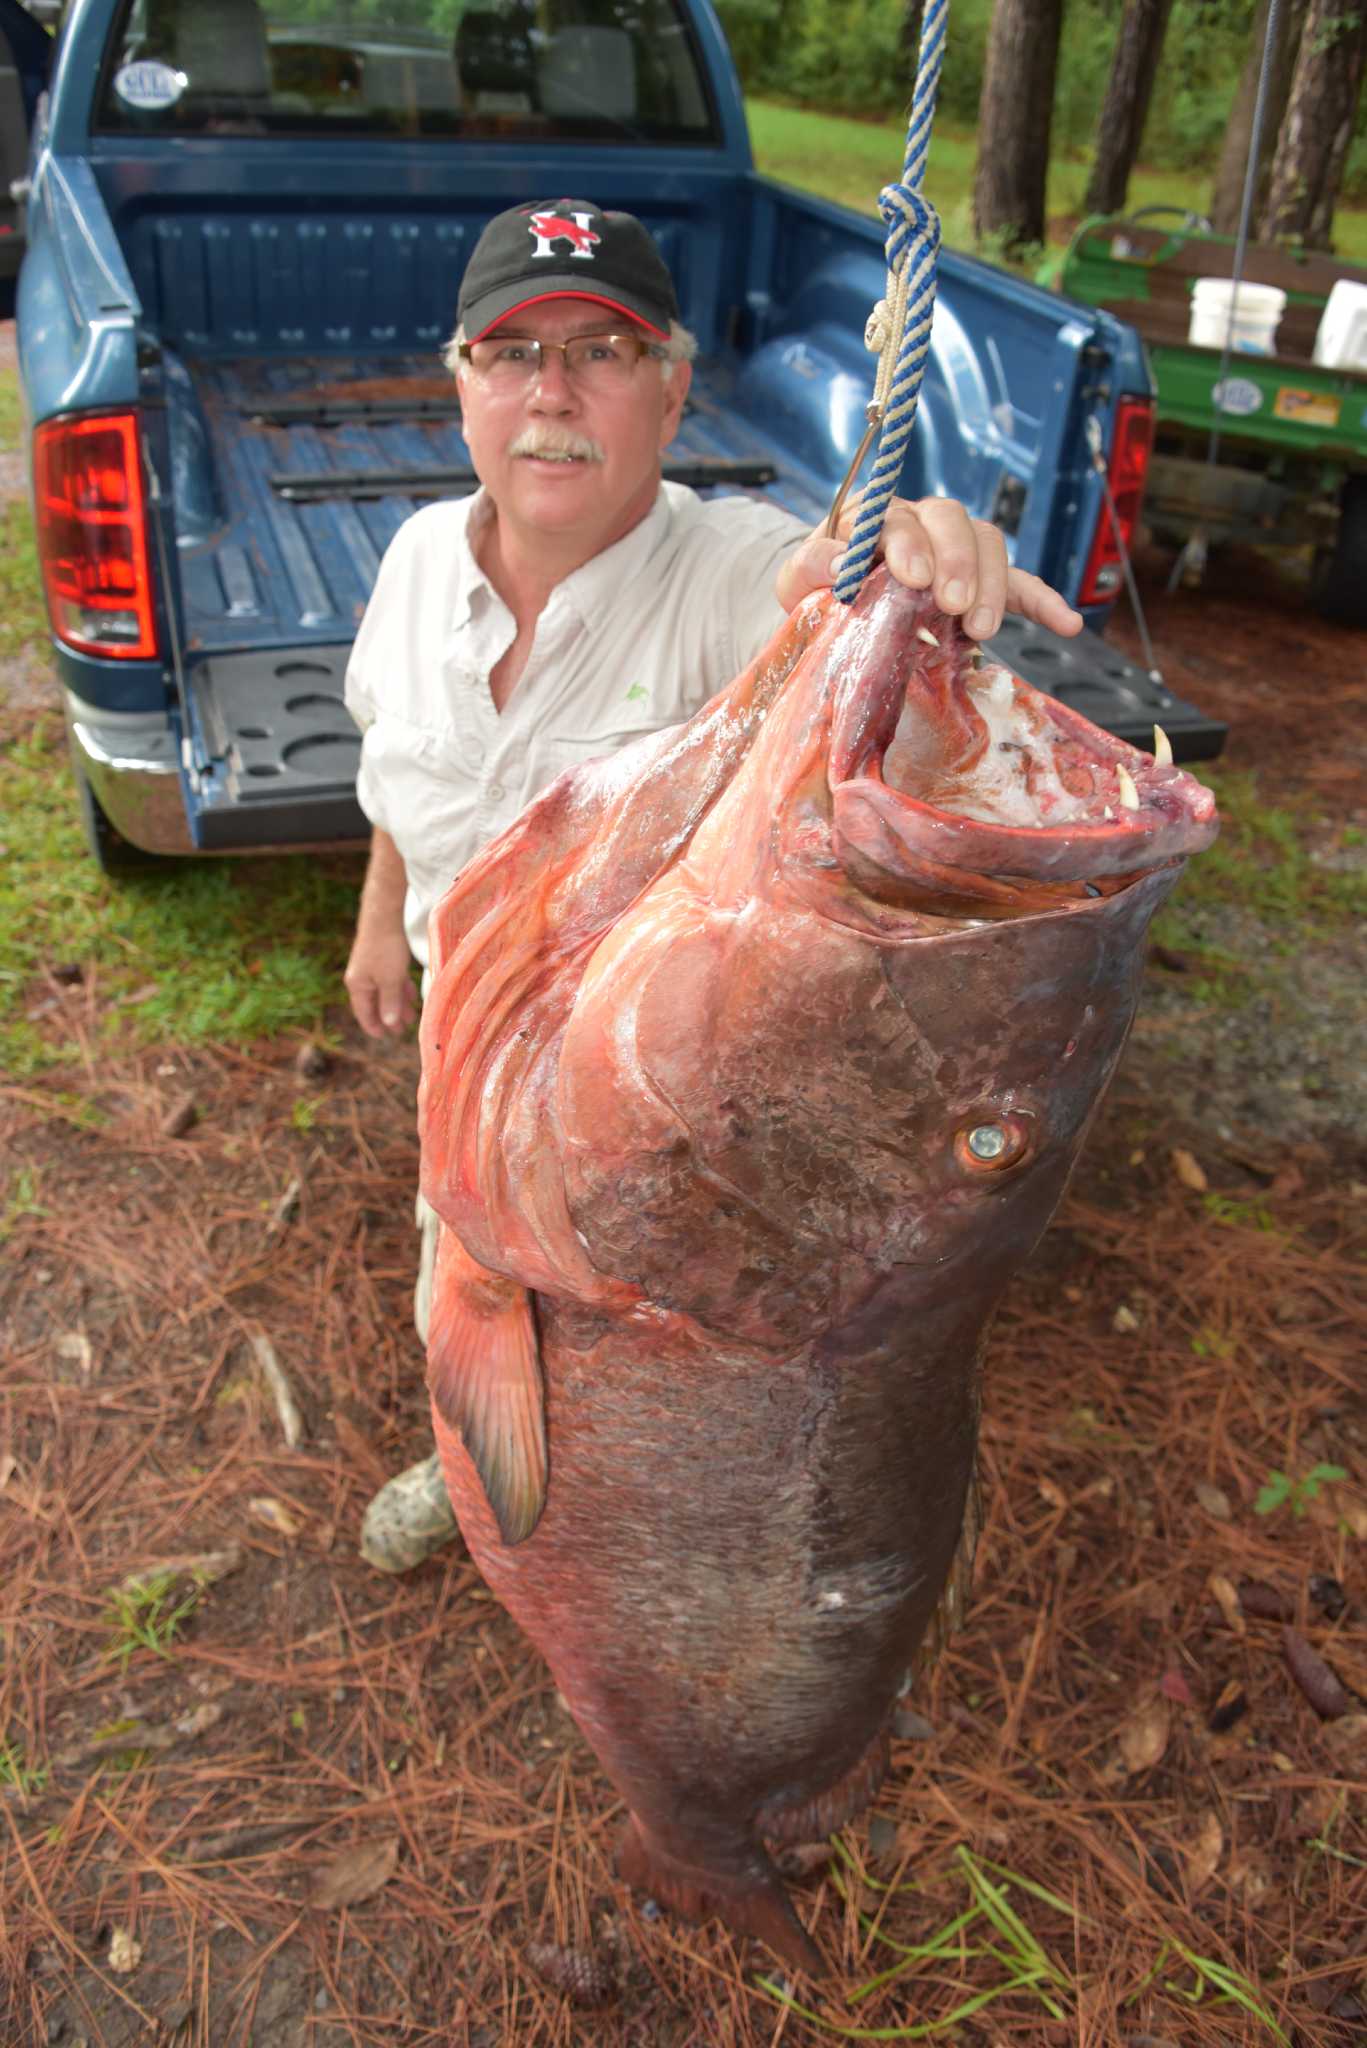 Huge cubera snapper fish may top Alabama list but leaves Texas record